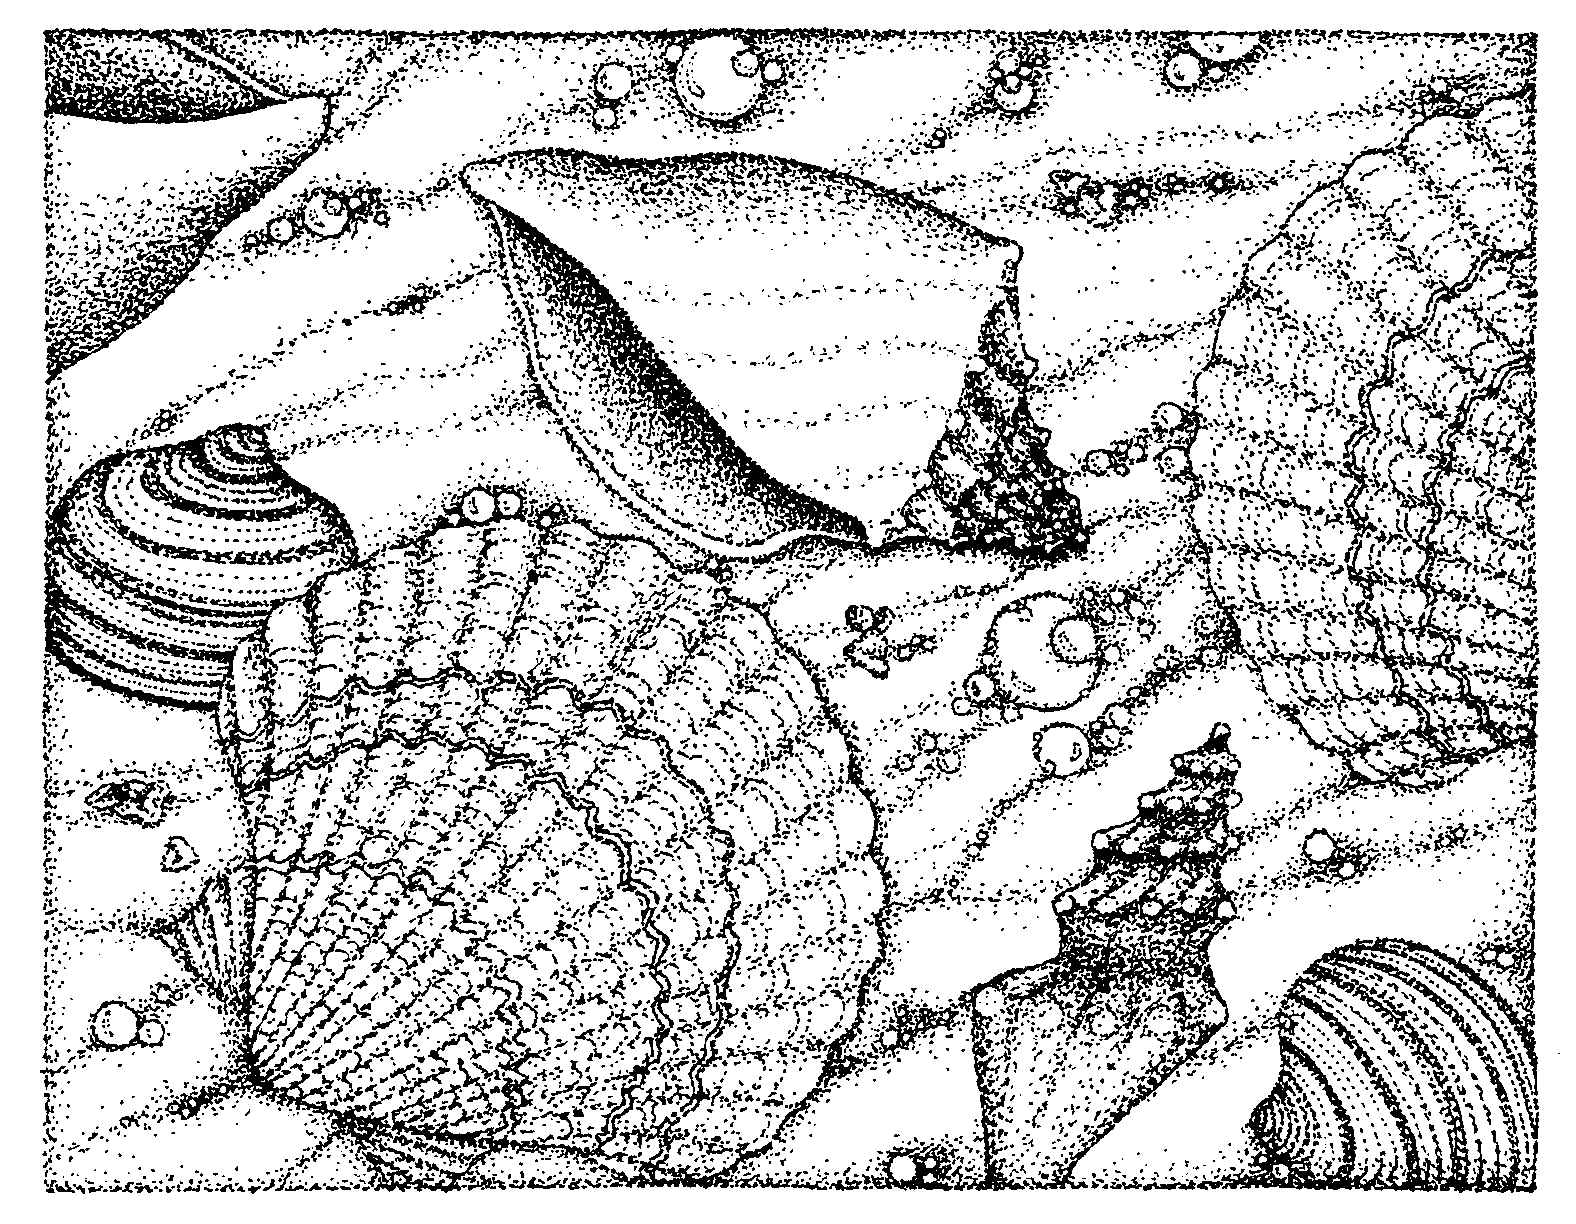 Free Coloring Pages Of Seashells Download Free Coloring Pages Of